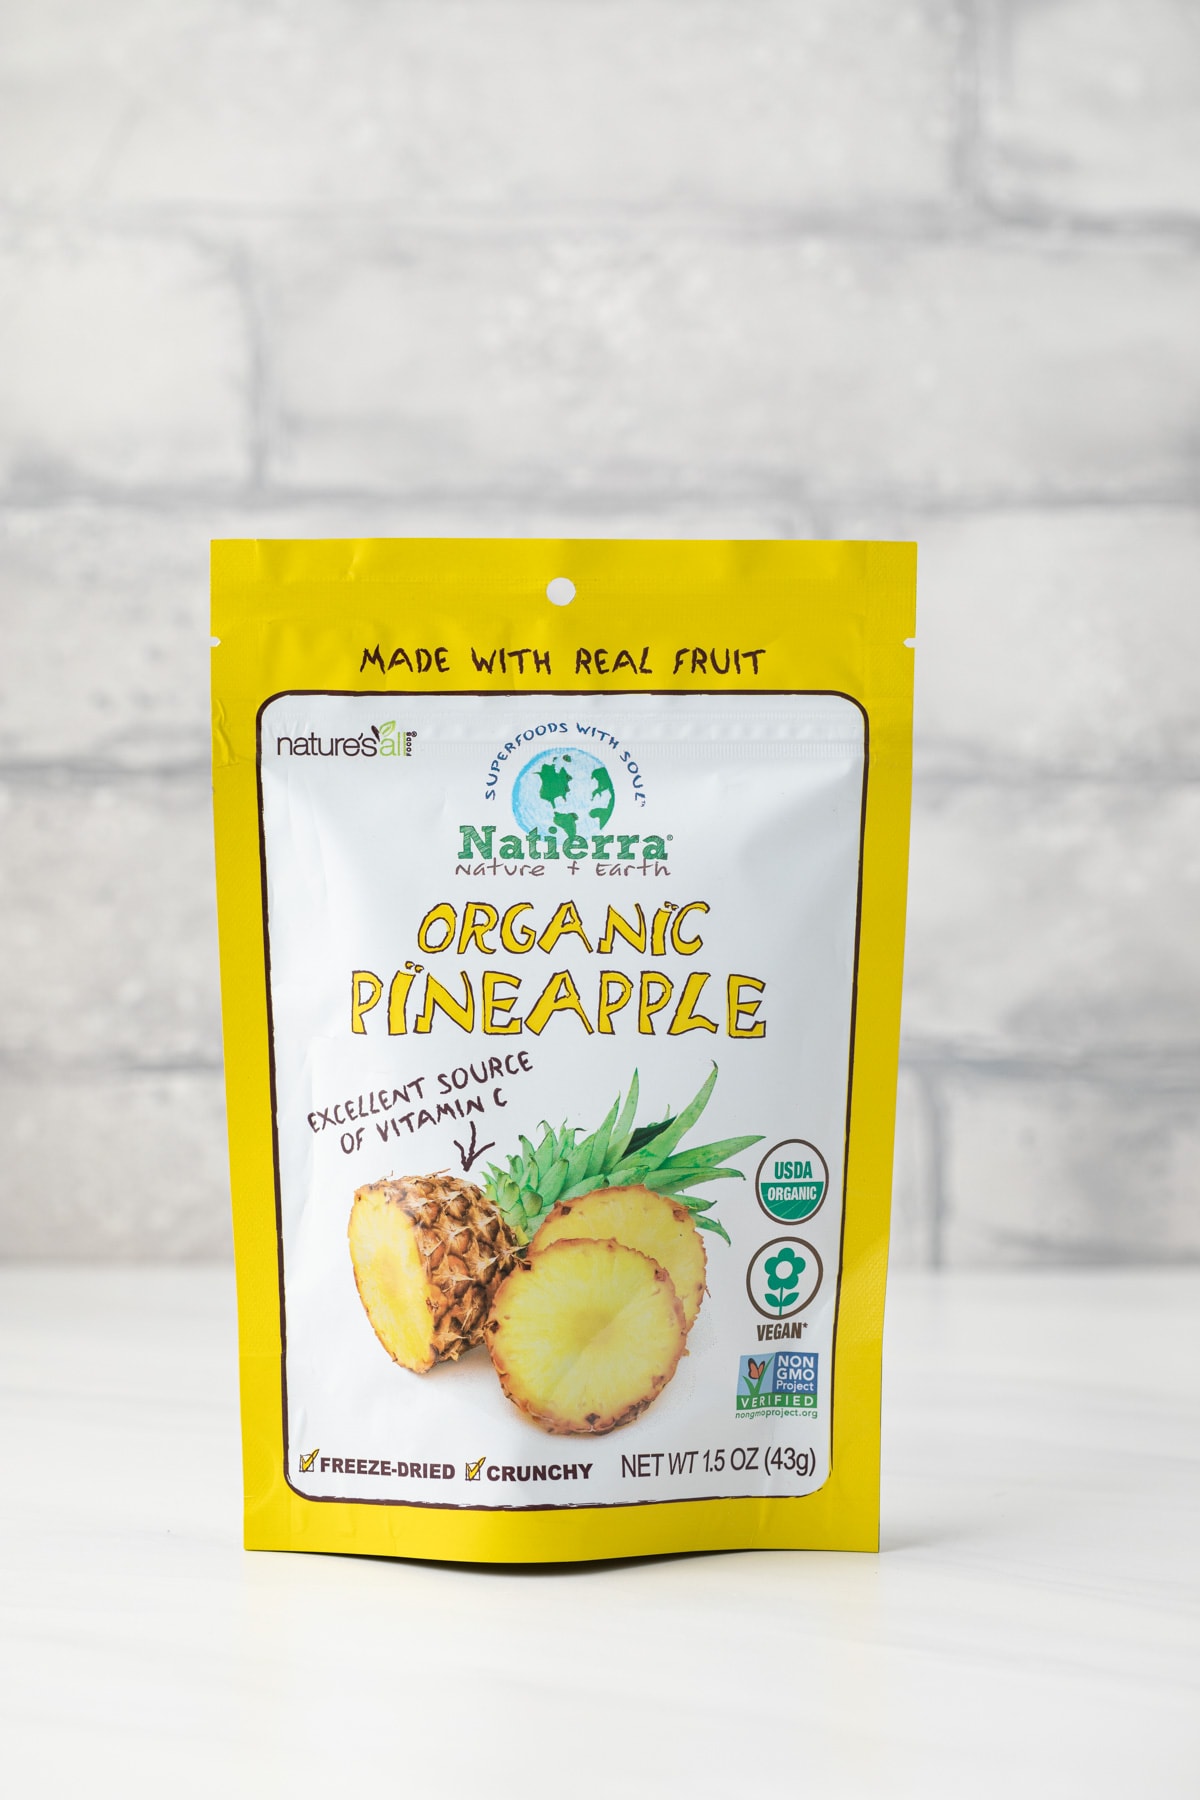 A bag of freeze dried pineapples